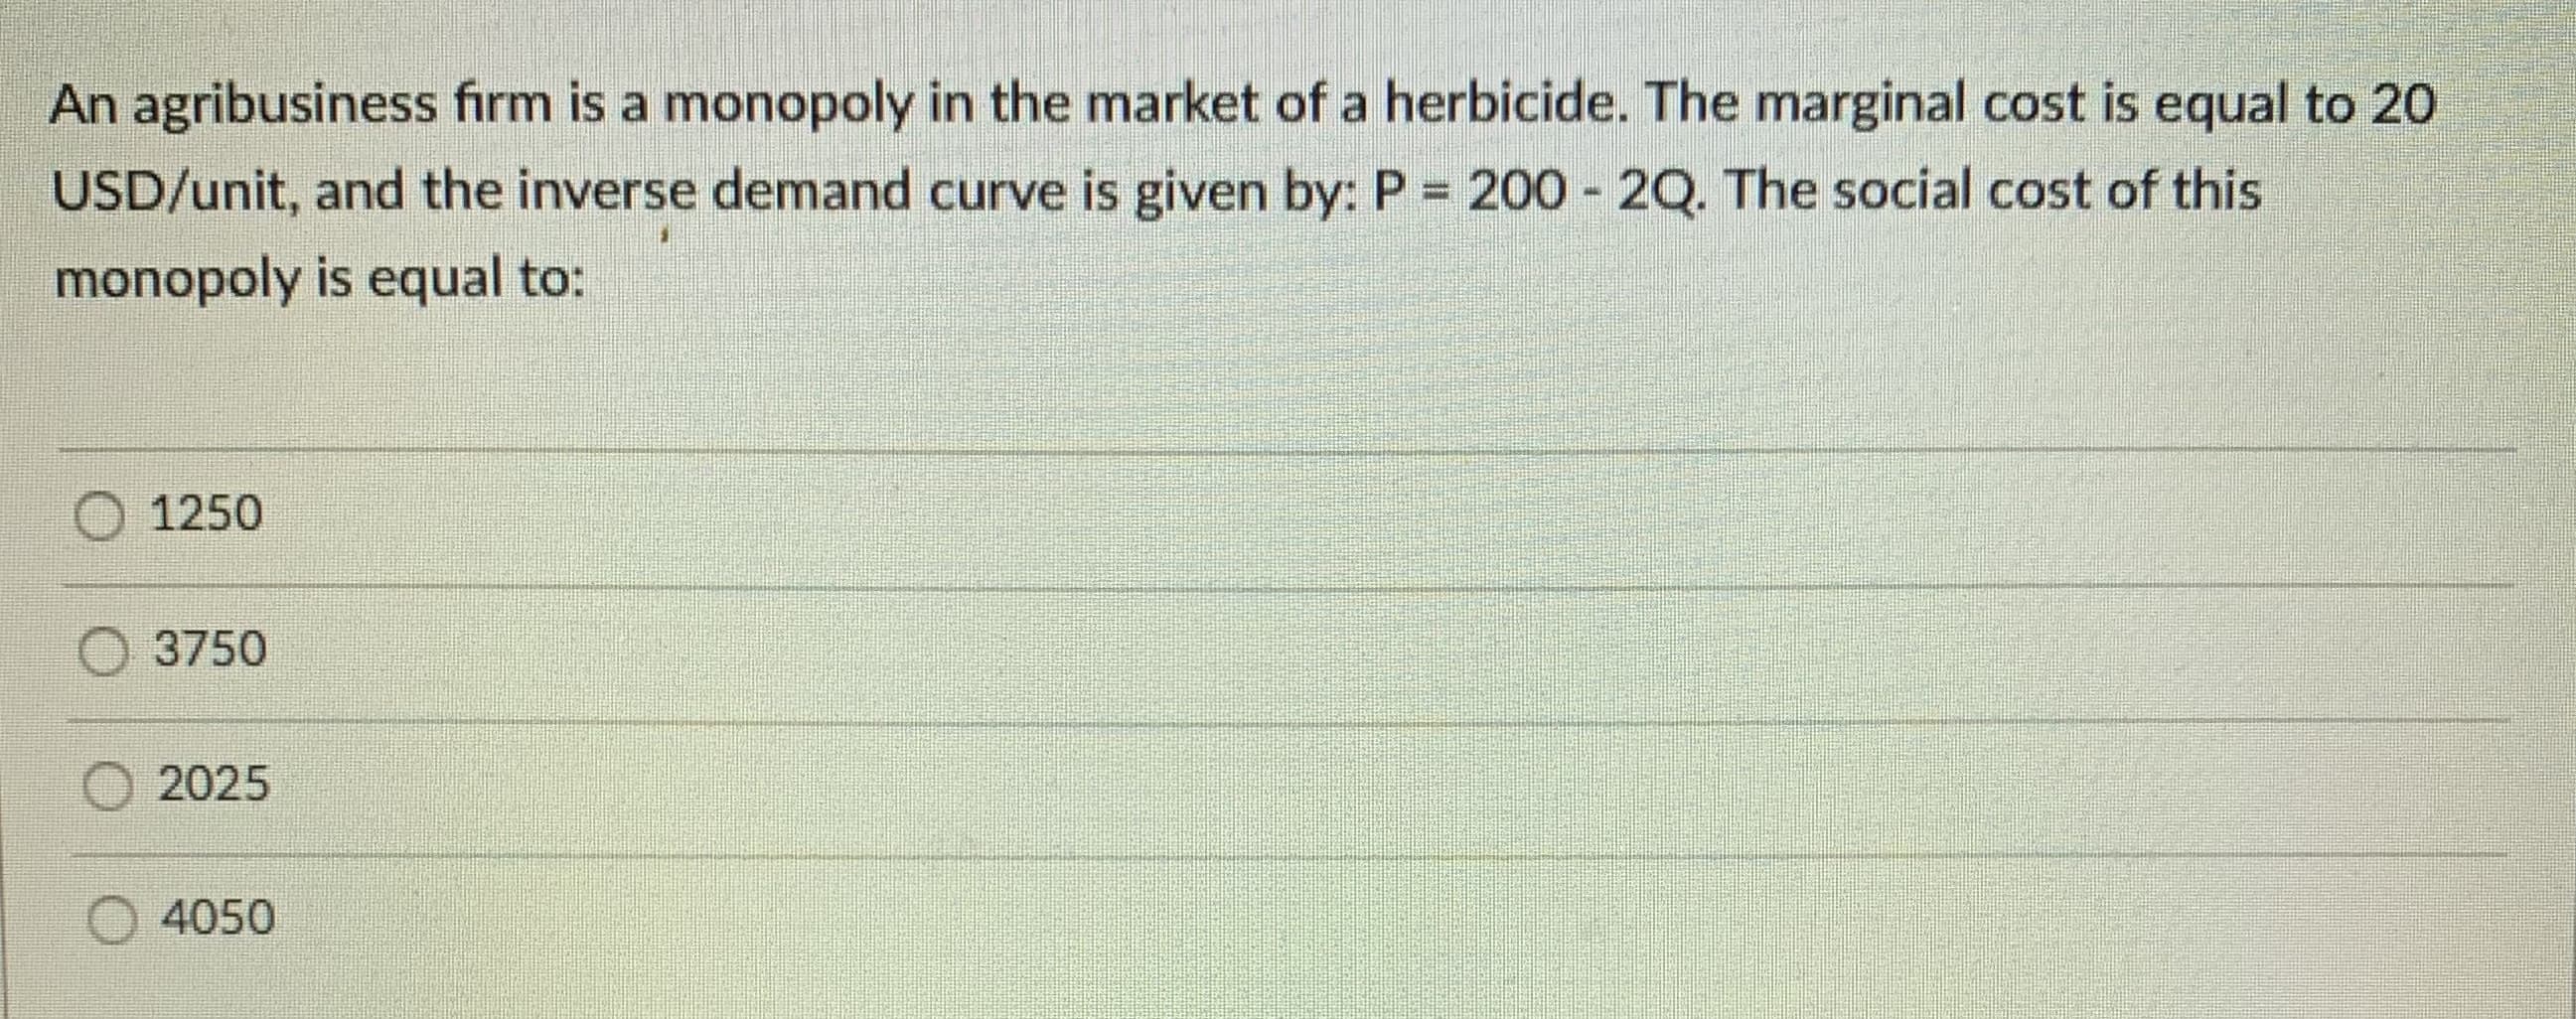 An agribusiness firm is a monopoly in the market of a herbicide. The marginal cost is equal to 20
USD/unit, and the inverse demand curve is given by: P = 200 2Q. The social cost of this
%3D
monopoly is equal to:
